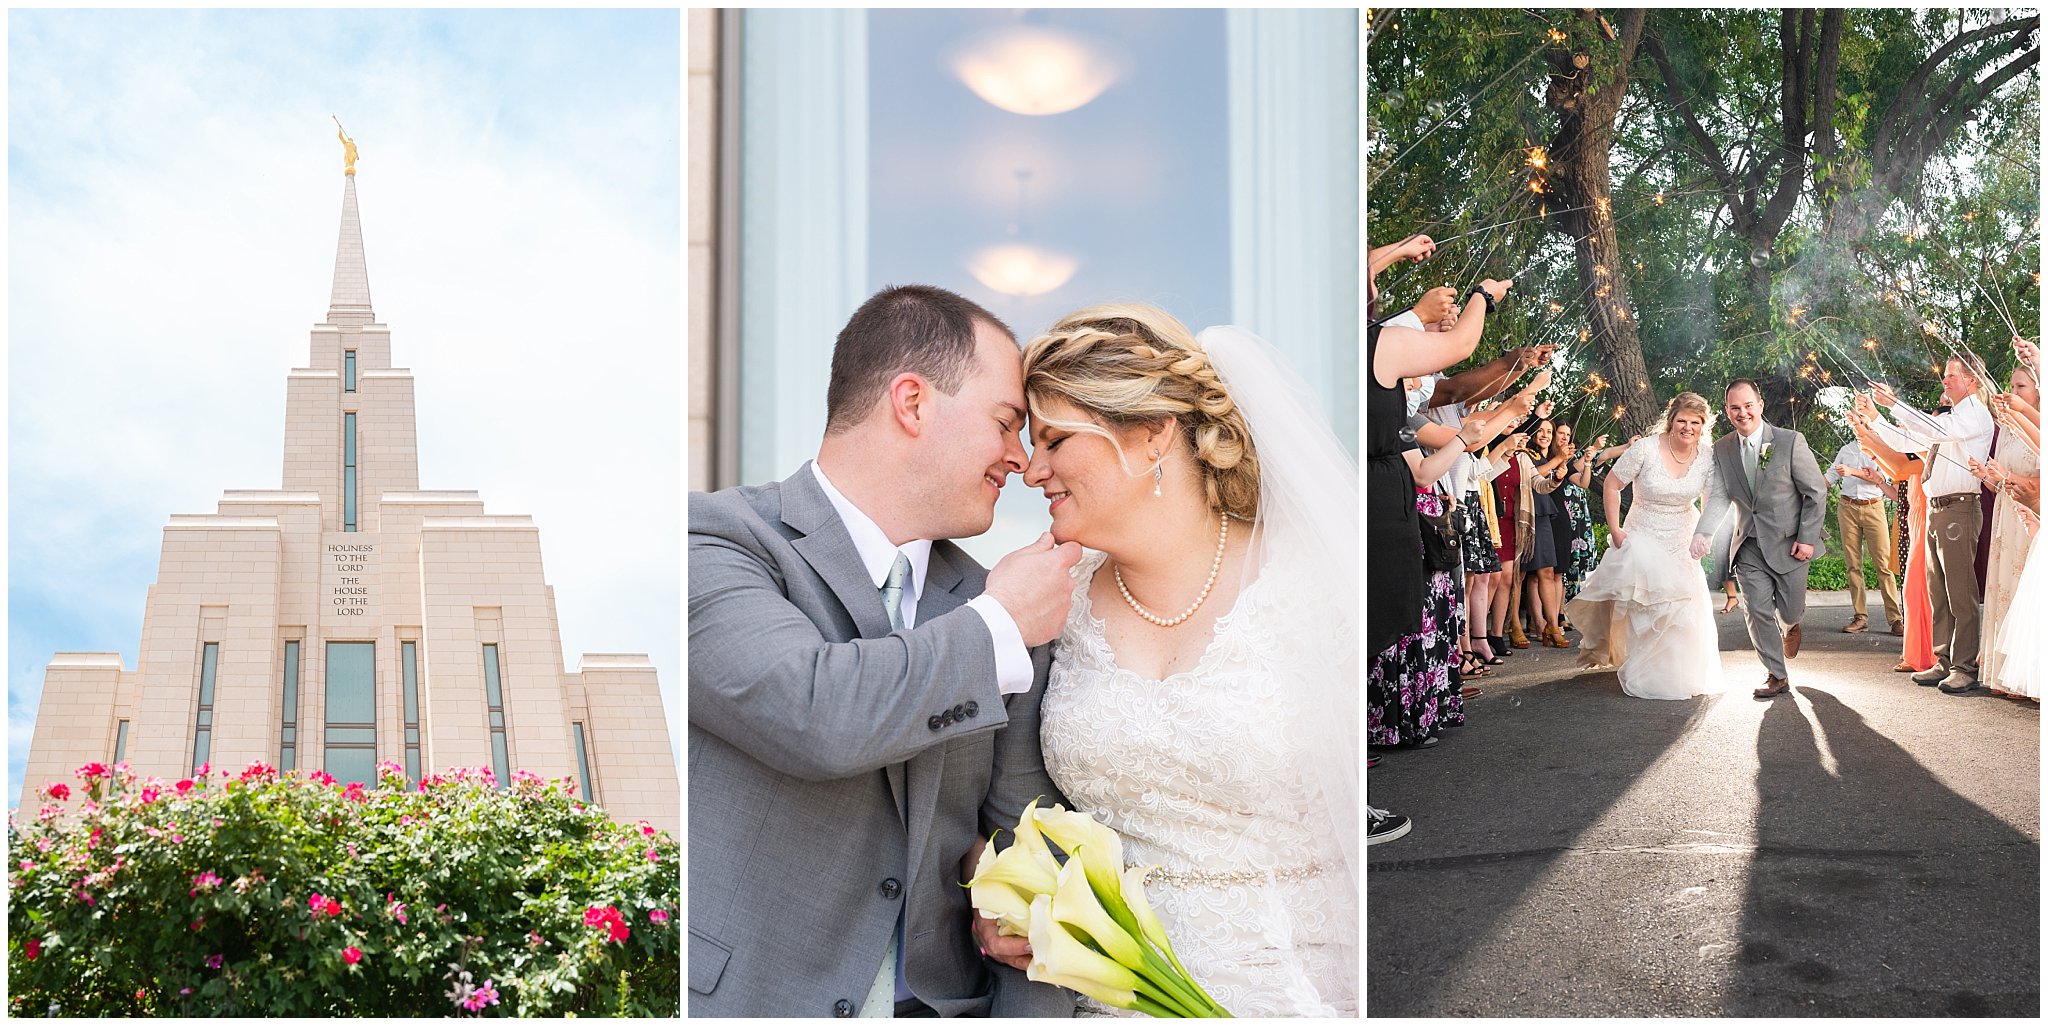 Oquirrh Mountain Temple and Millennial Falls Wedding | Jessie and Dallin Photography